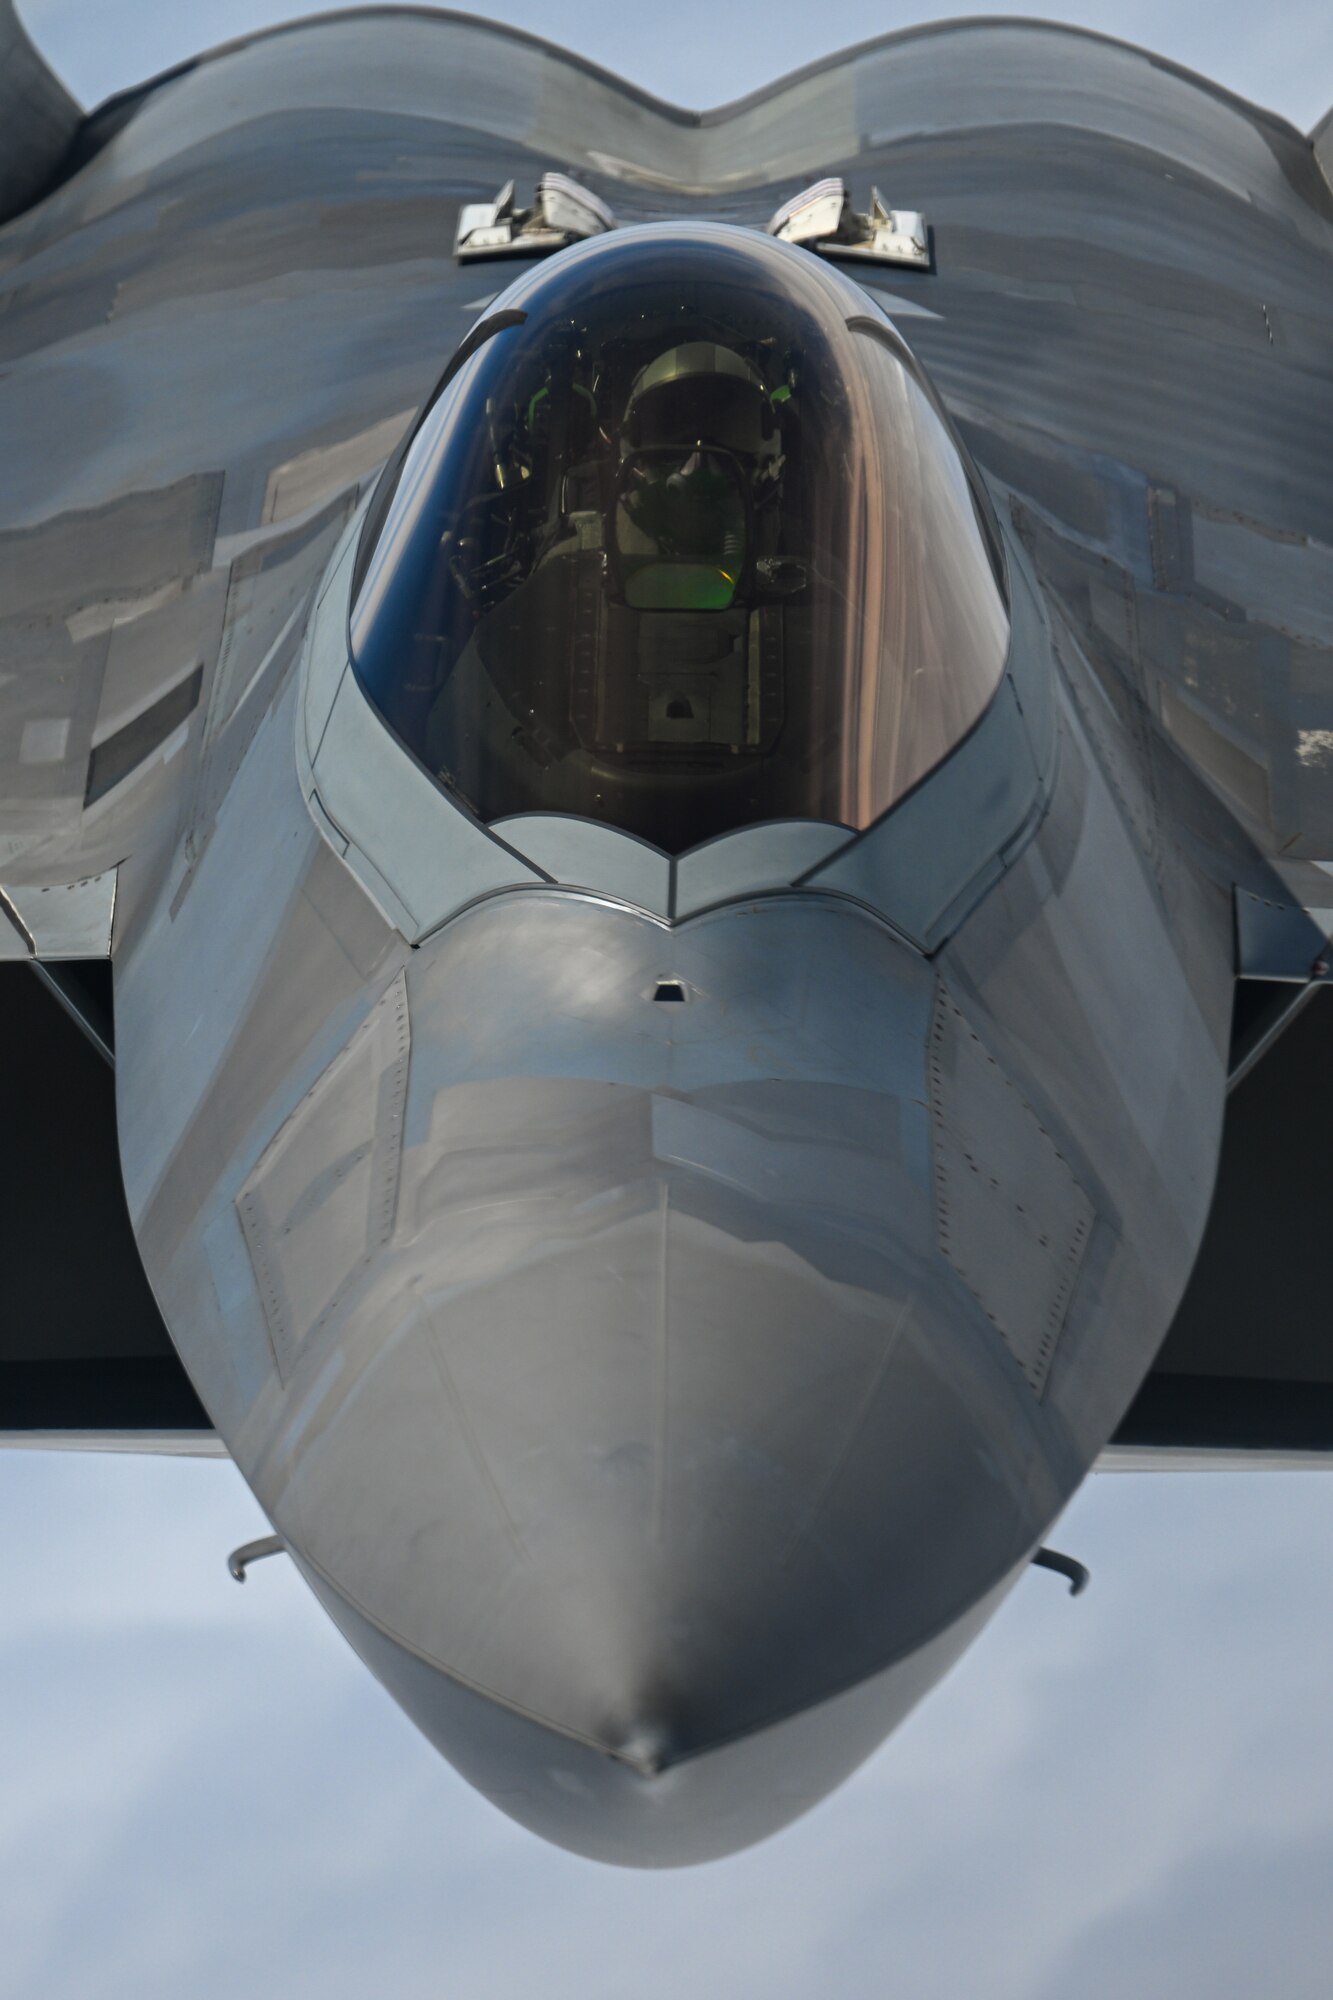 A U.S. Air Force F-22 Raptor, deployed to Kadena Air Base, Japan, approaches a KC-135 Stratotanker assigned to the 909th Air Refueling Squadron, Kadena AB, for aerial refueling, June 10, 2022. For decades, Kadena Air Base has served as the Keystone of the Pacific, enabling U.S. power projection. (U.S. Air Force photo by Tech. Sgt. Corban Lundborg)